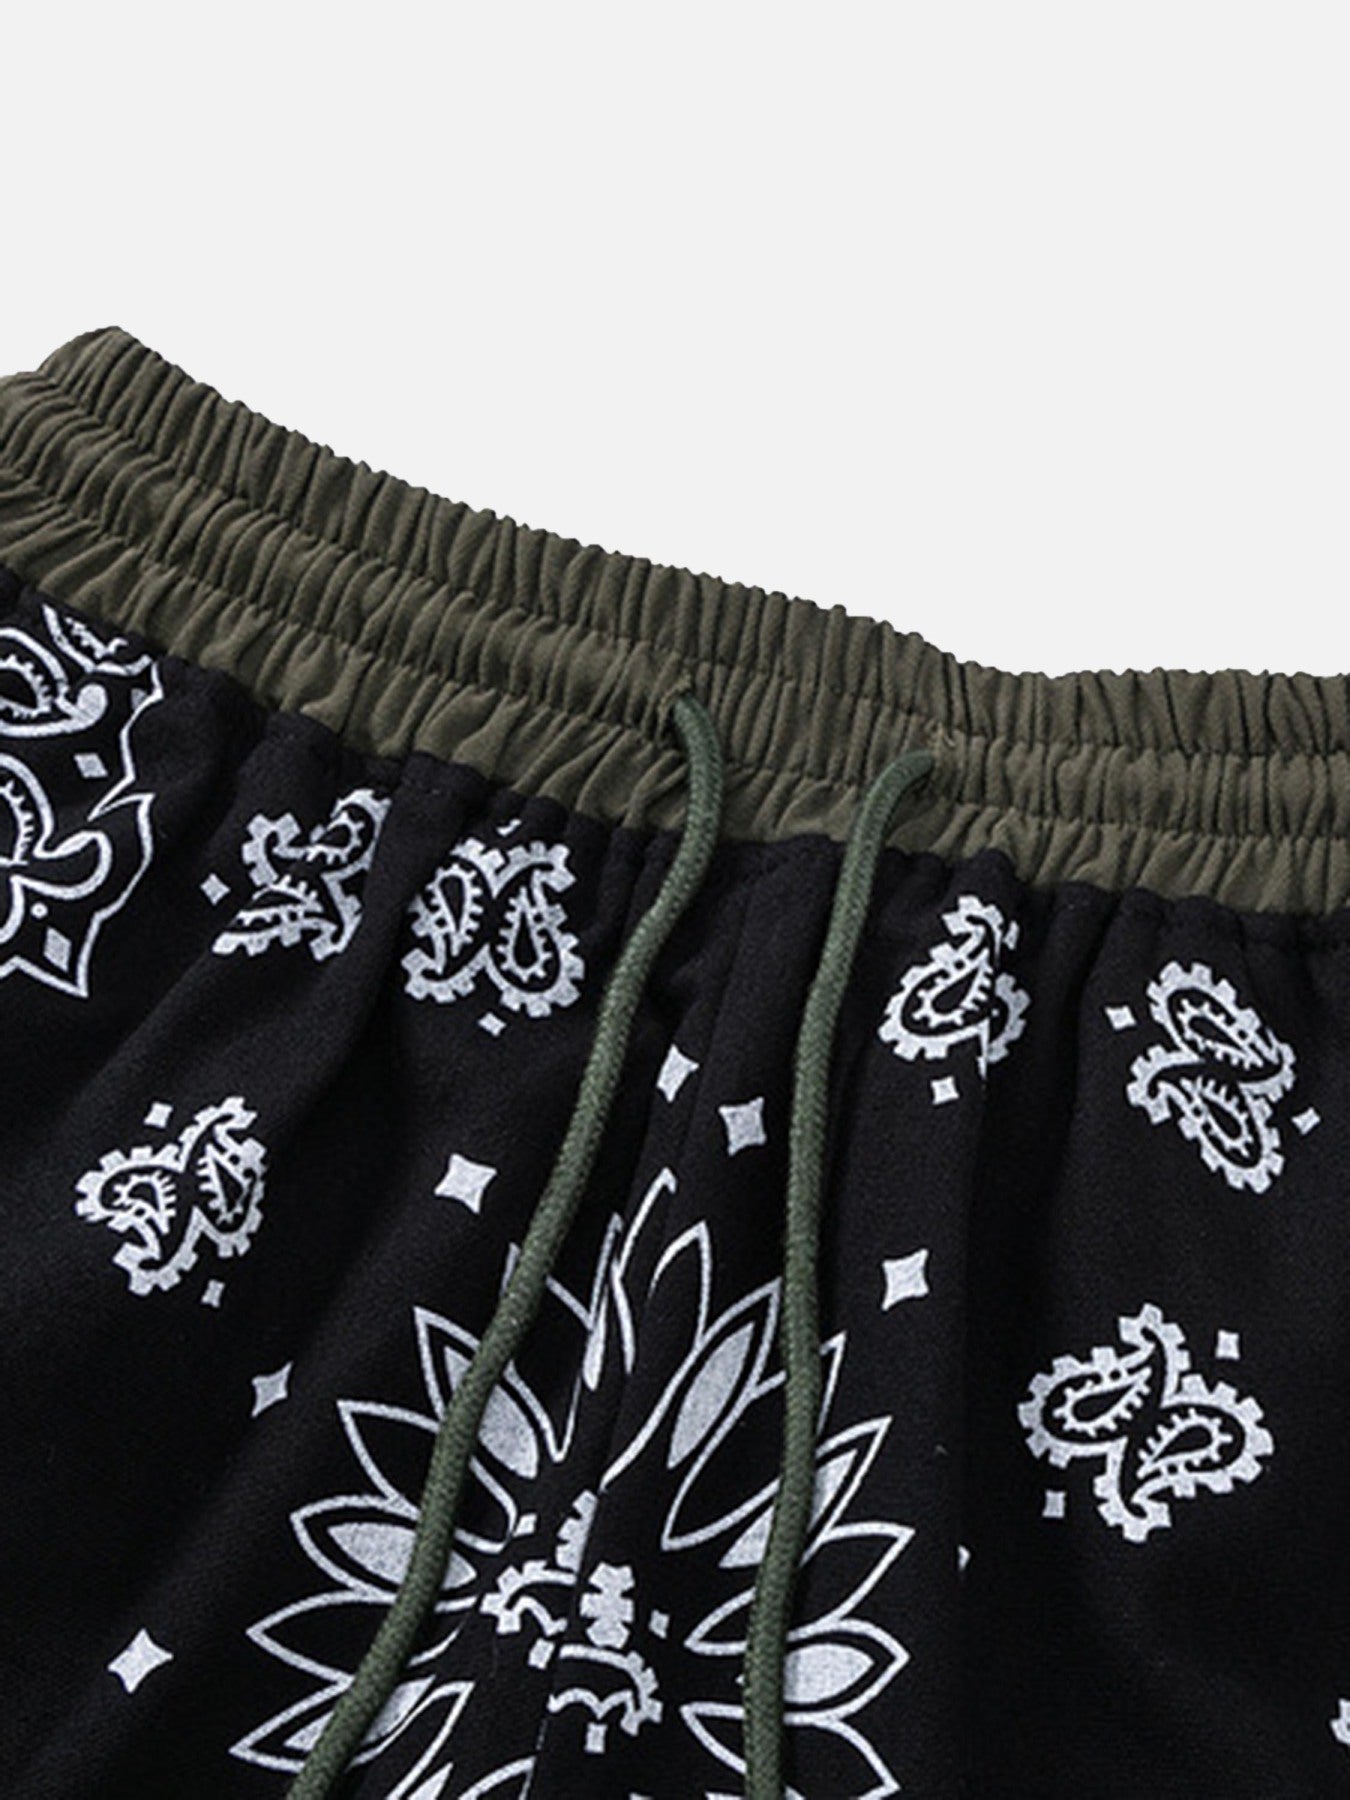 Thesupermade High Street Cashew Flower Casual Shorts